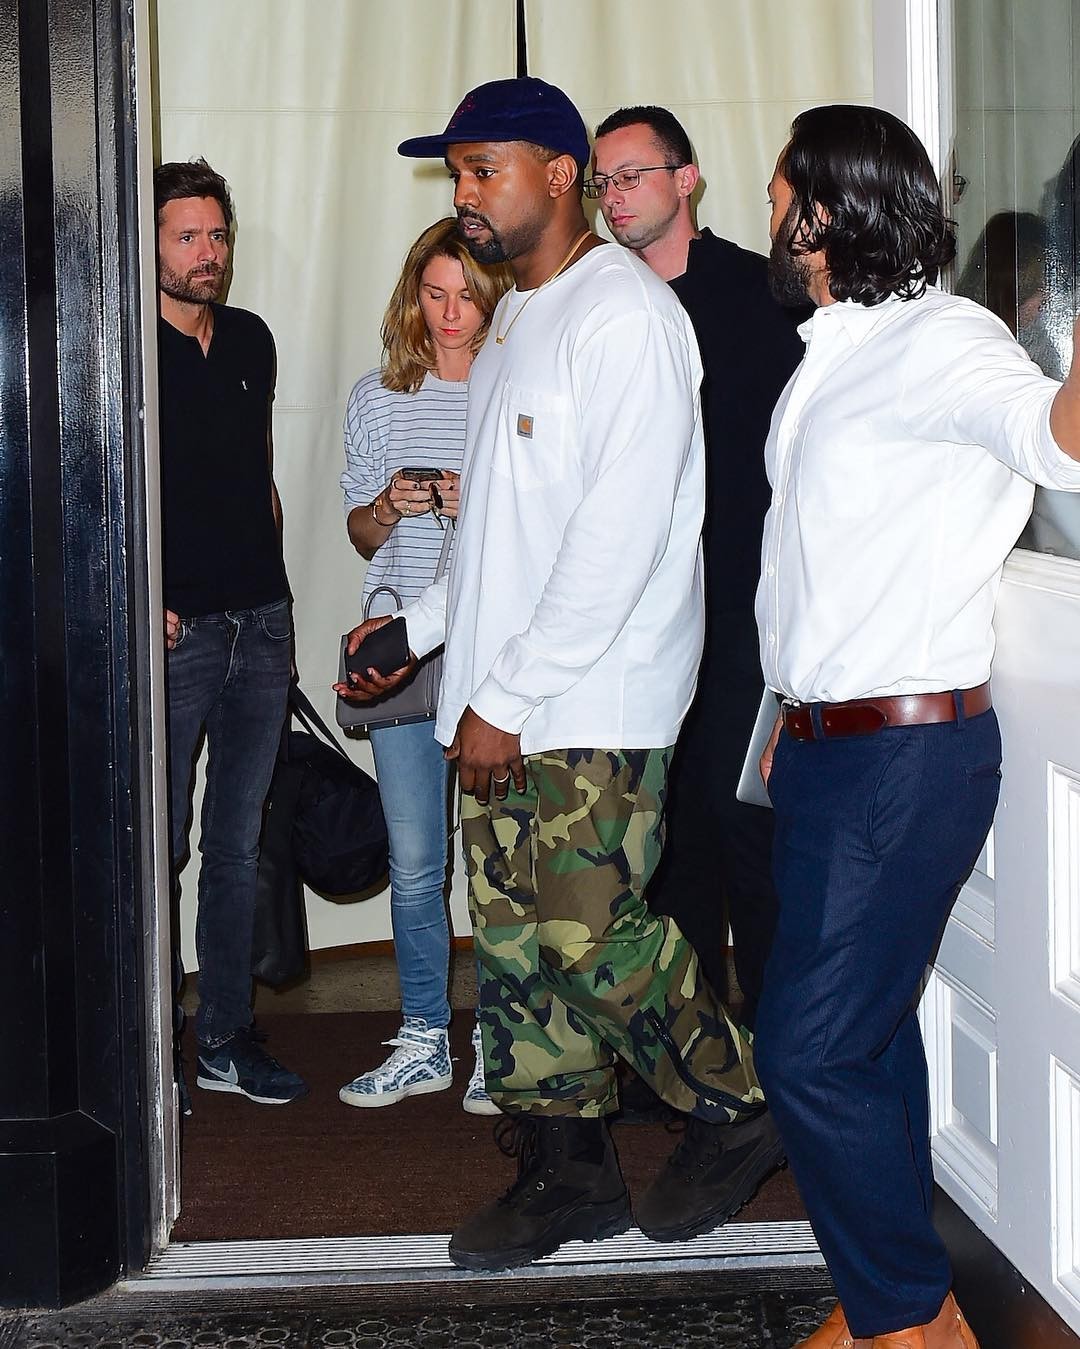 SPOTTED: Kanye West in Yeezy Boots And Carhartt